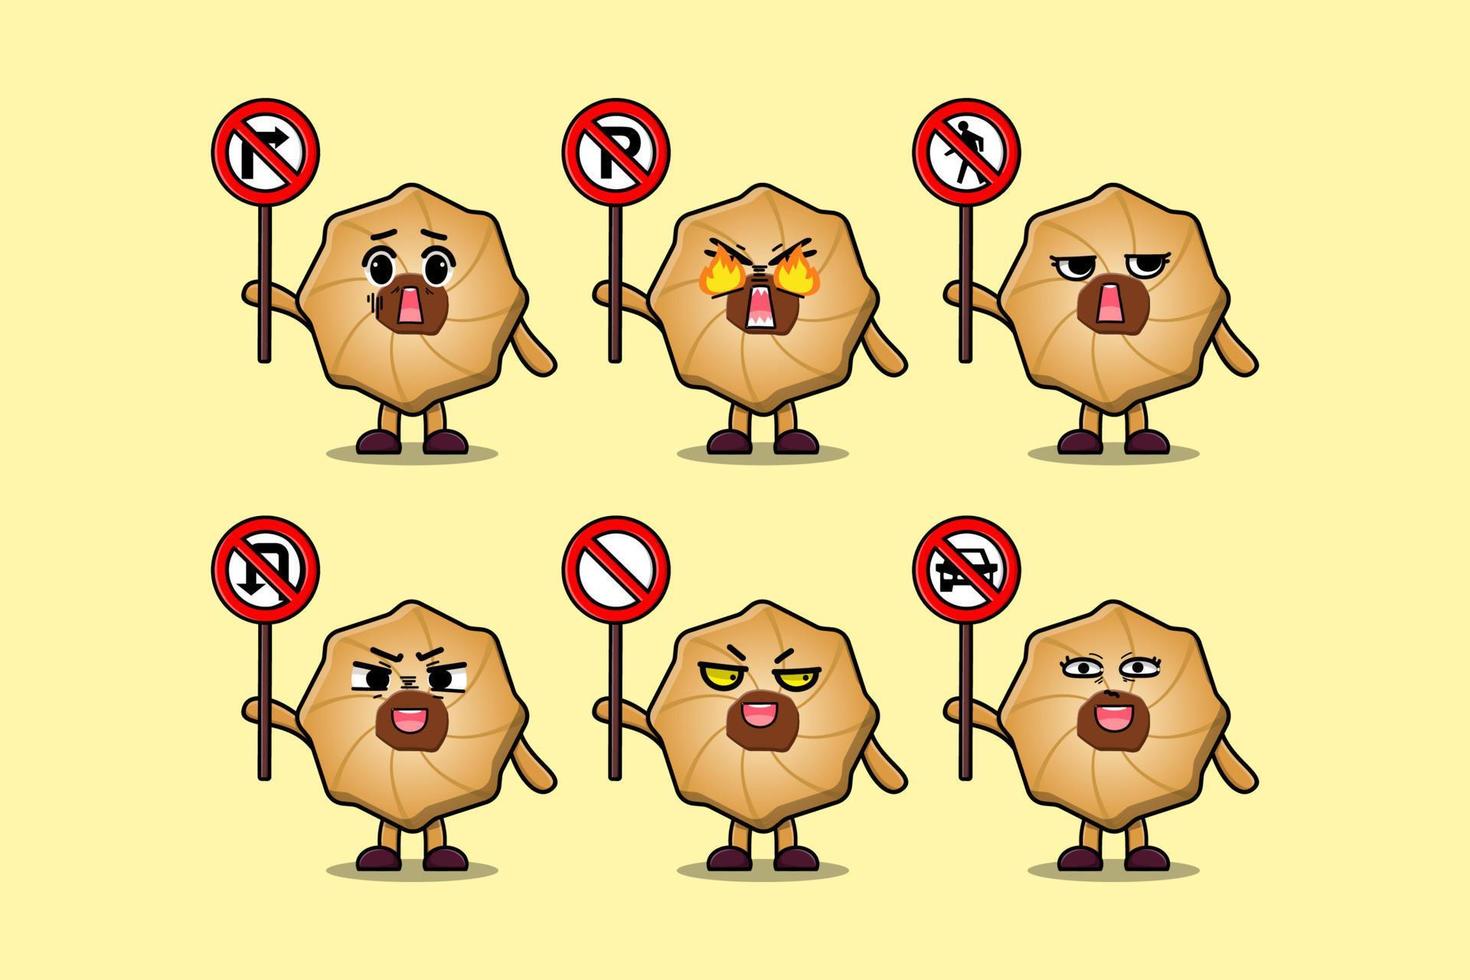 Cute Cookies cartoon character hold traffic sign vector